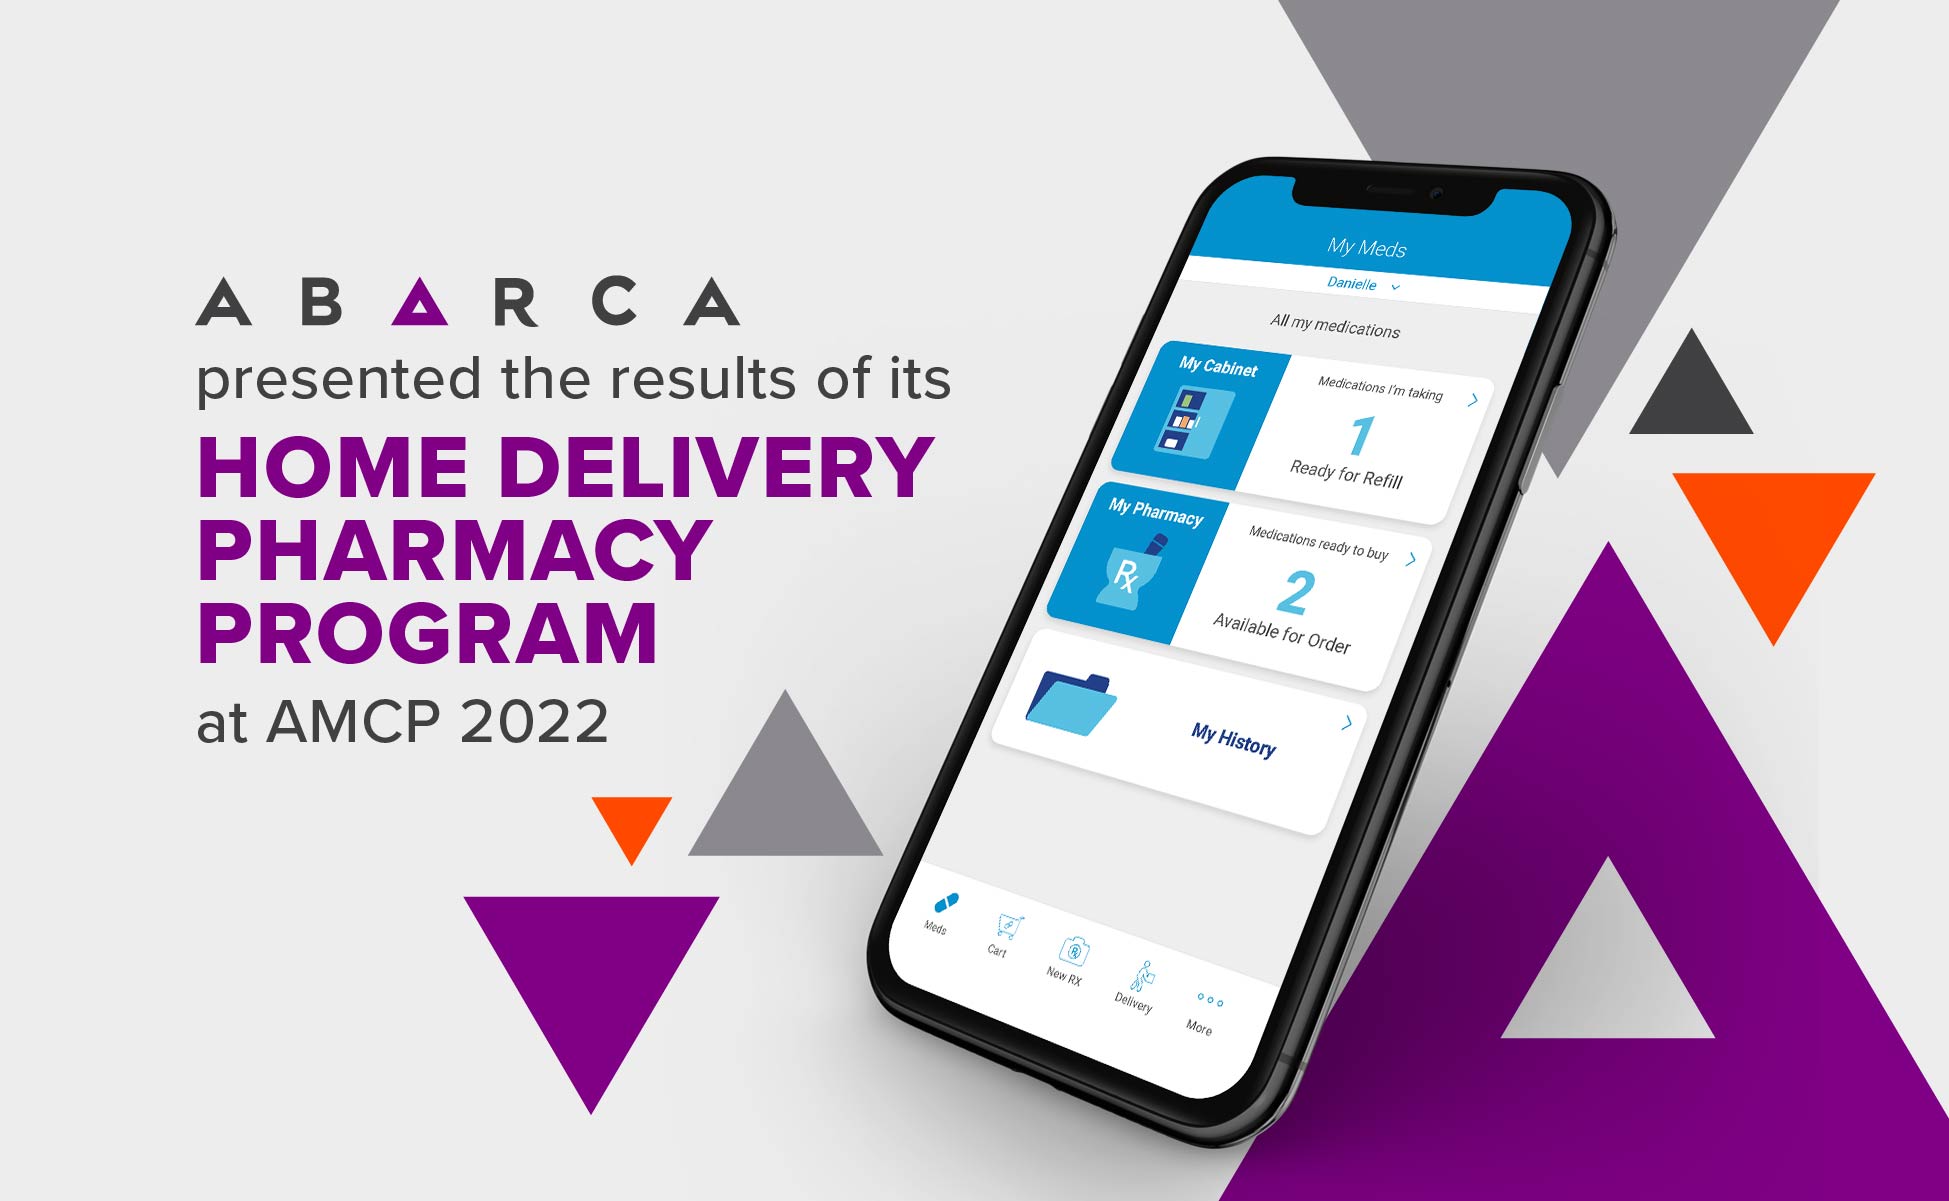 Abarca presented on the results of it's home delivery pharmacy program, Triple-S en Casa, at AMCP 2022